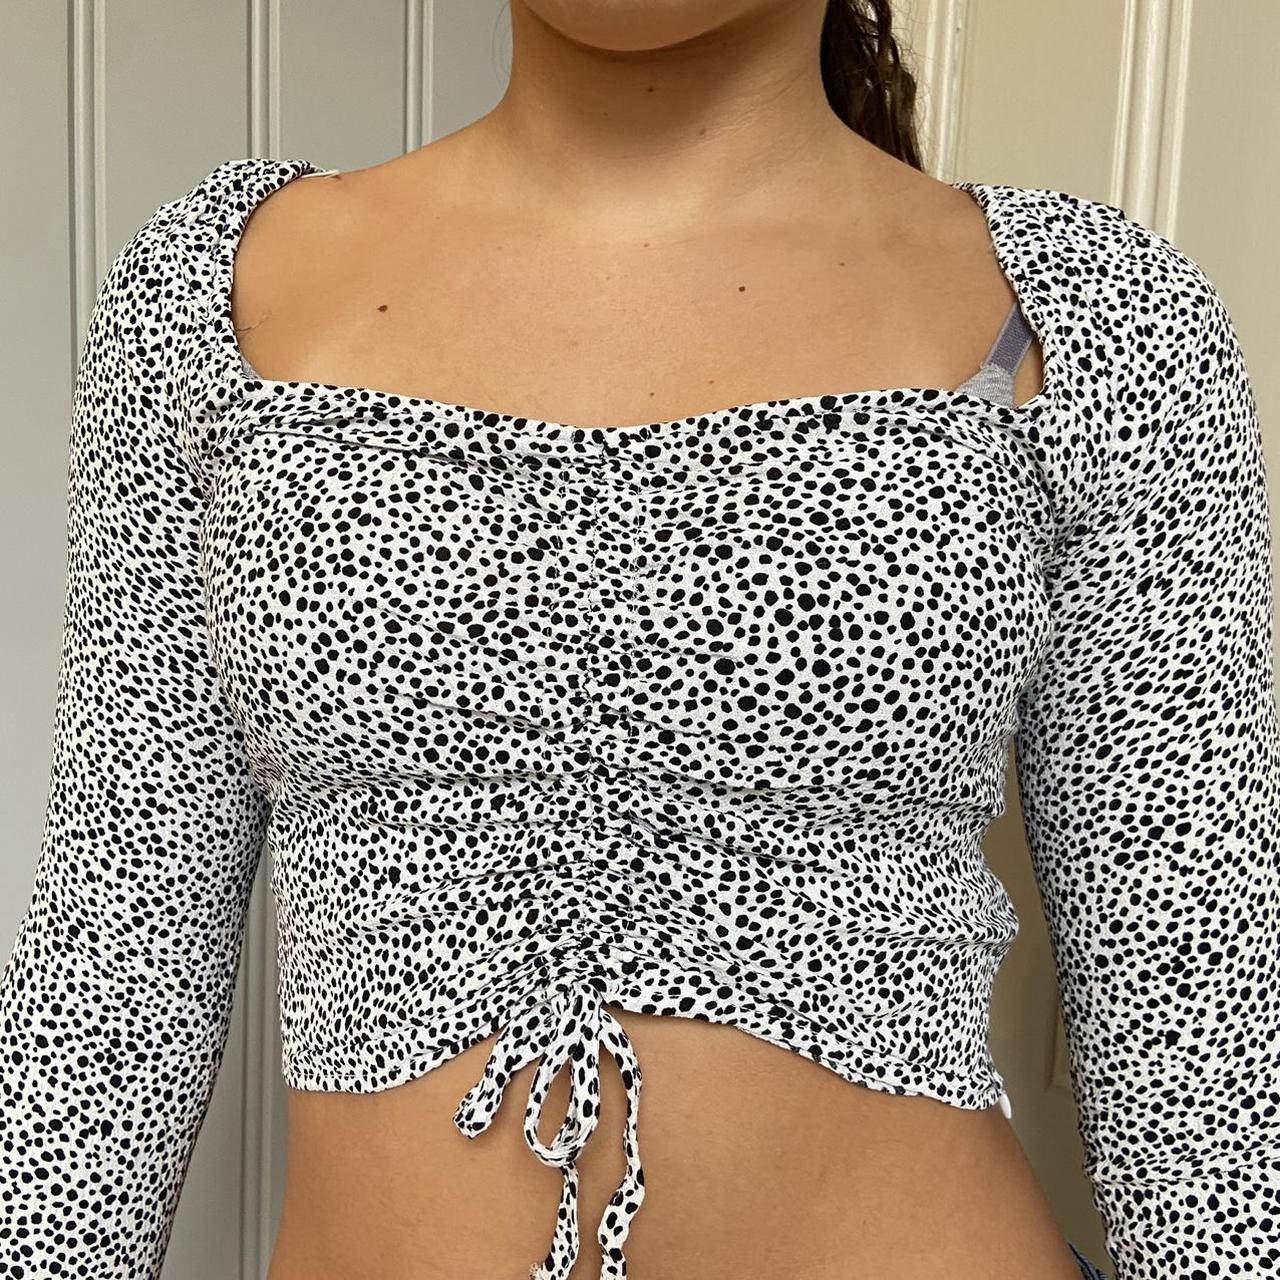 Women's White and Black Crop-top (2)